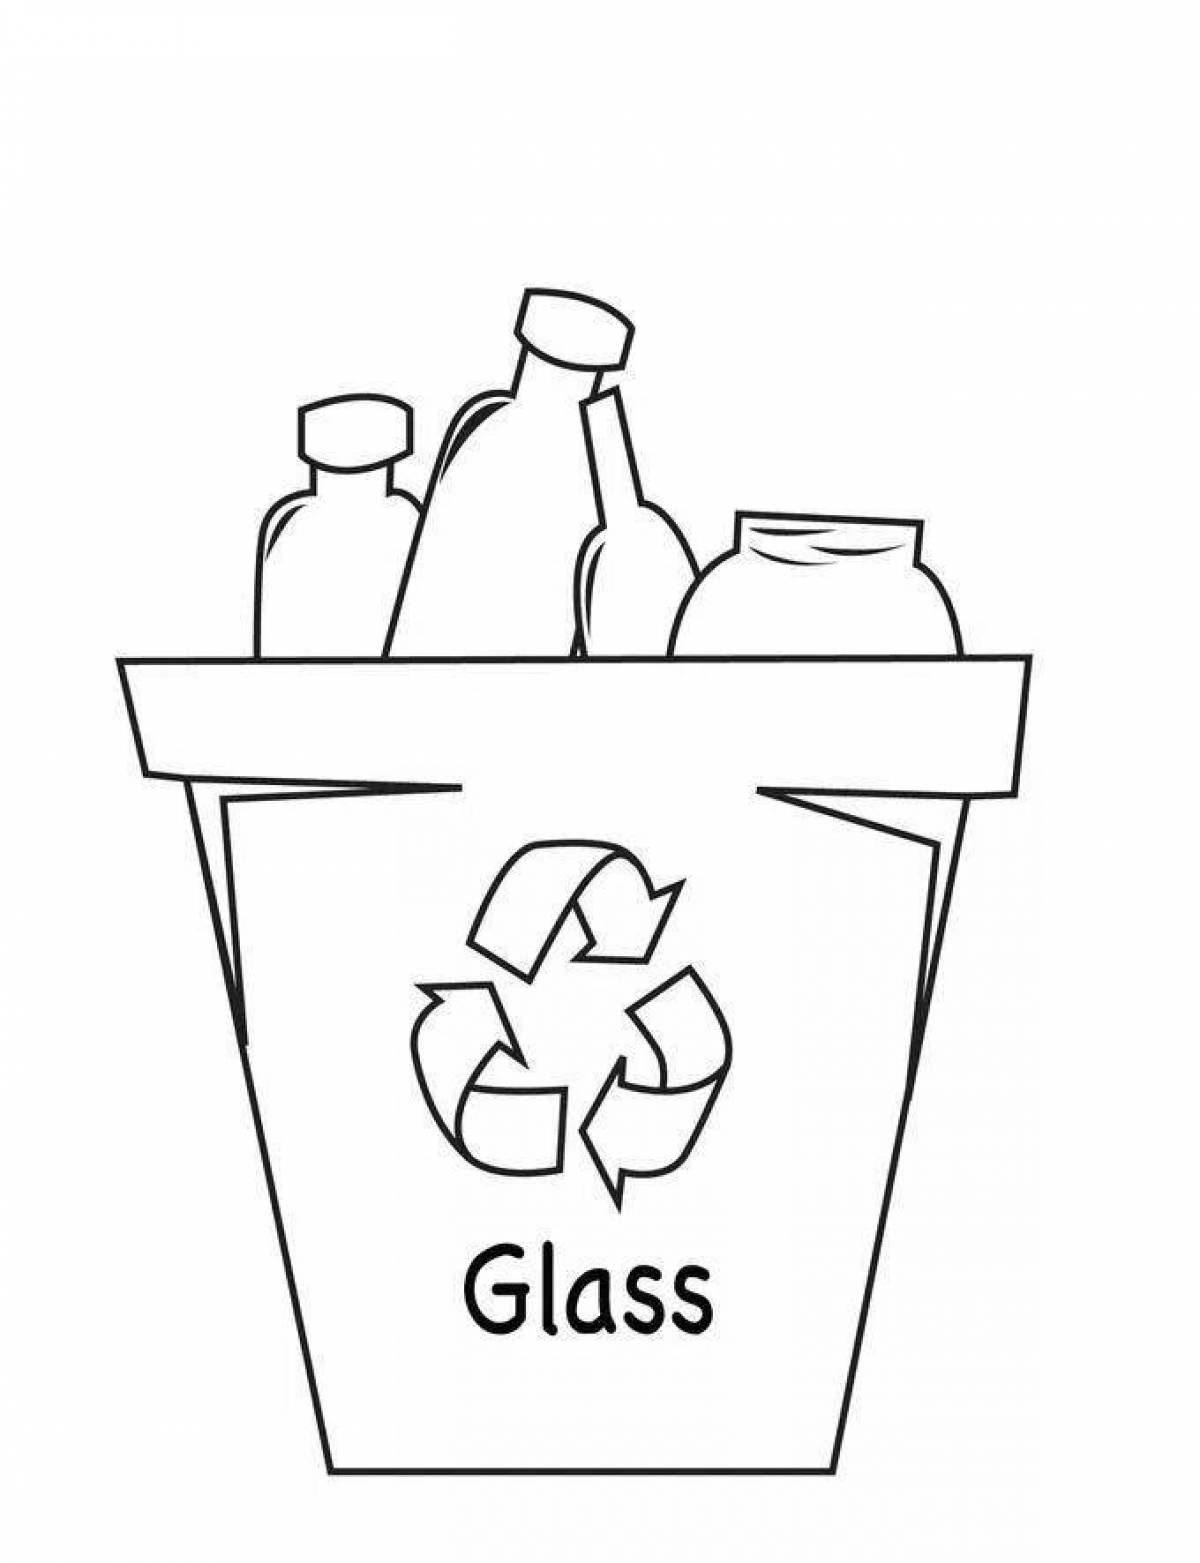 Elegant trash can coloring page